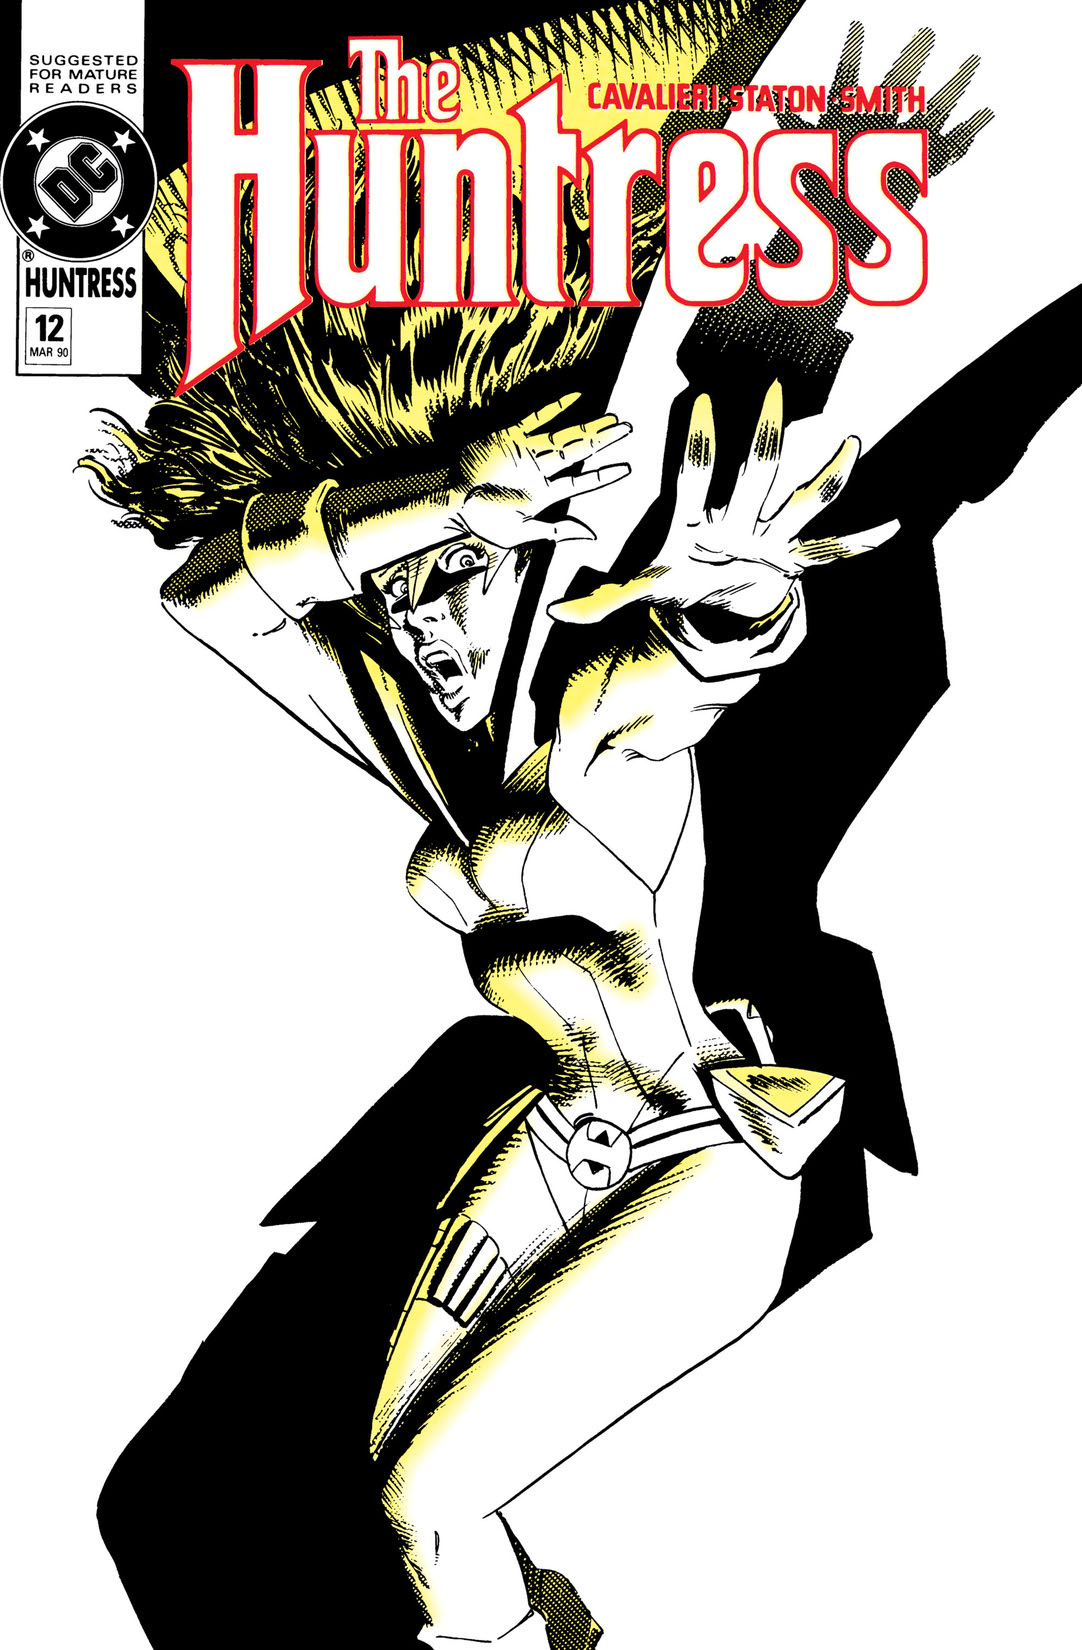 The Huntress (1989-1990) #12 preview images